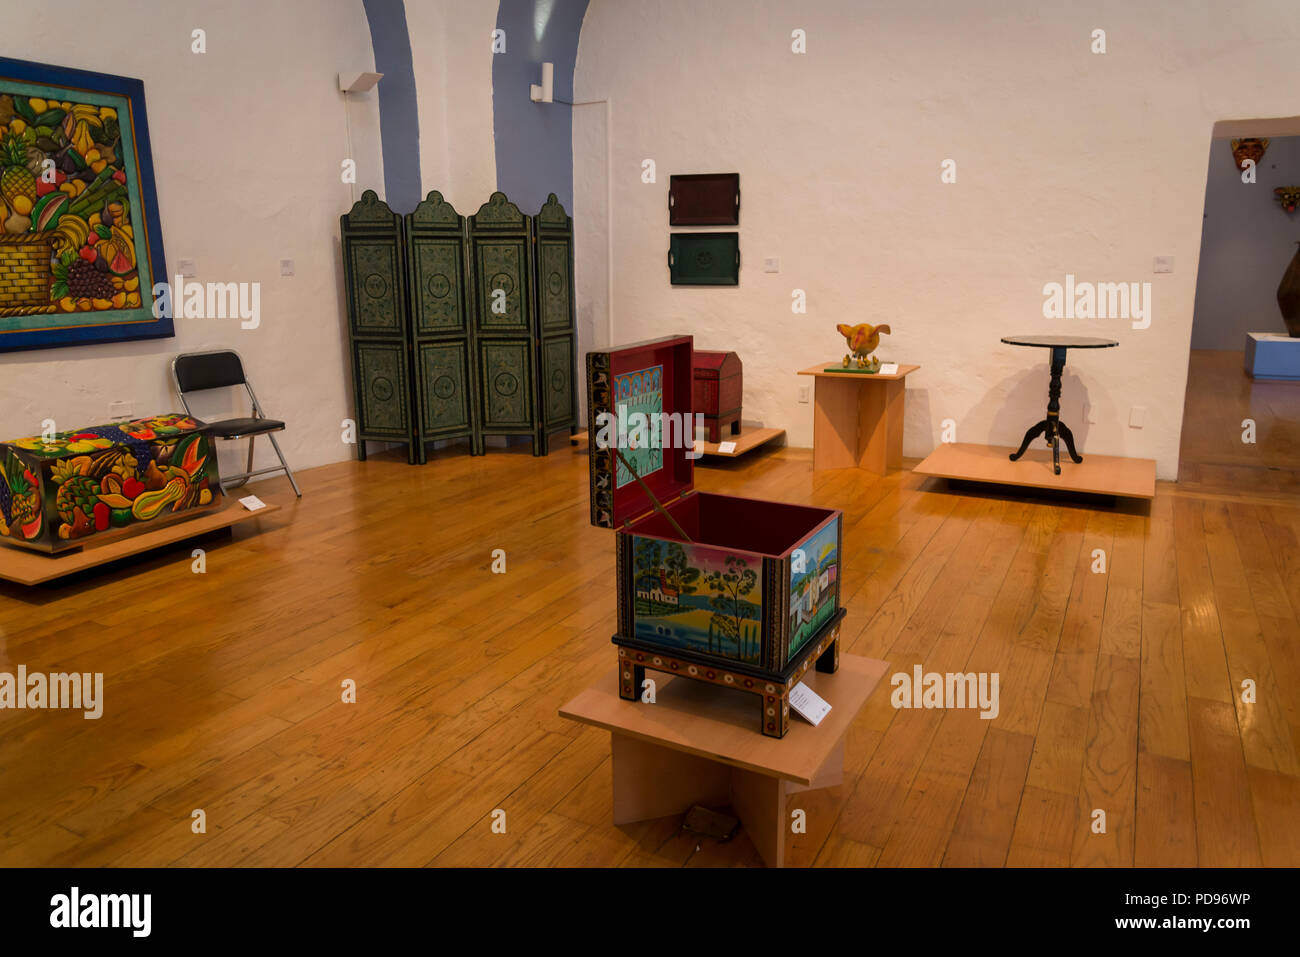 San Pedro Art Museum, located in a former 16th-century hospital, Indigenous art exhibition, Puebla, Mexico Stock Photo